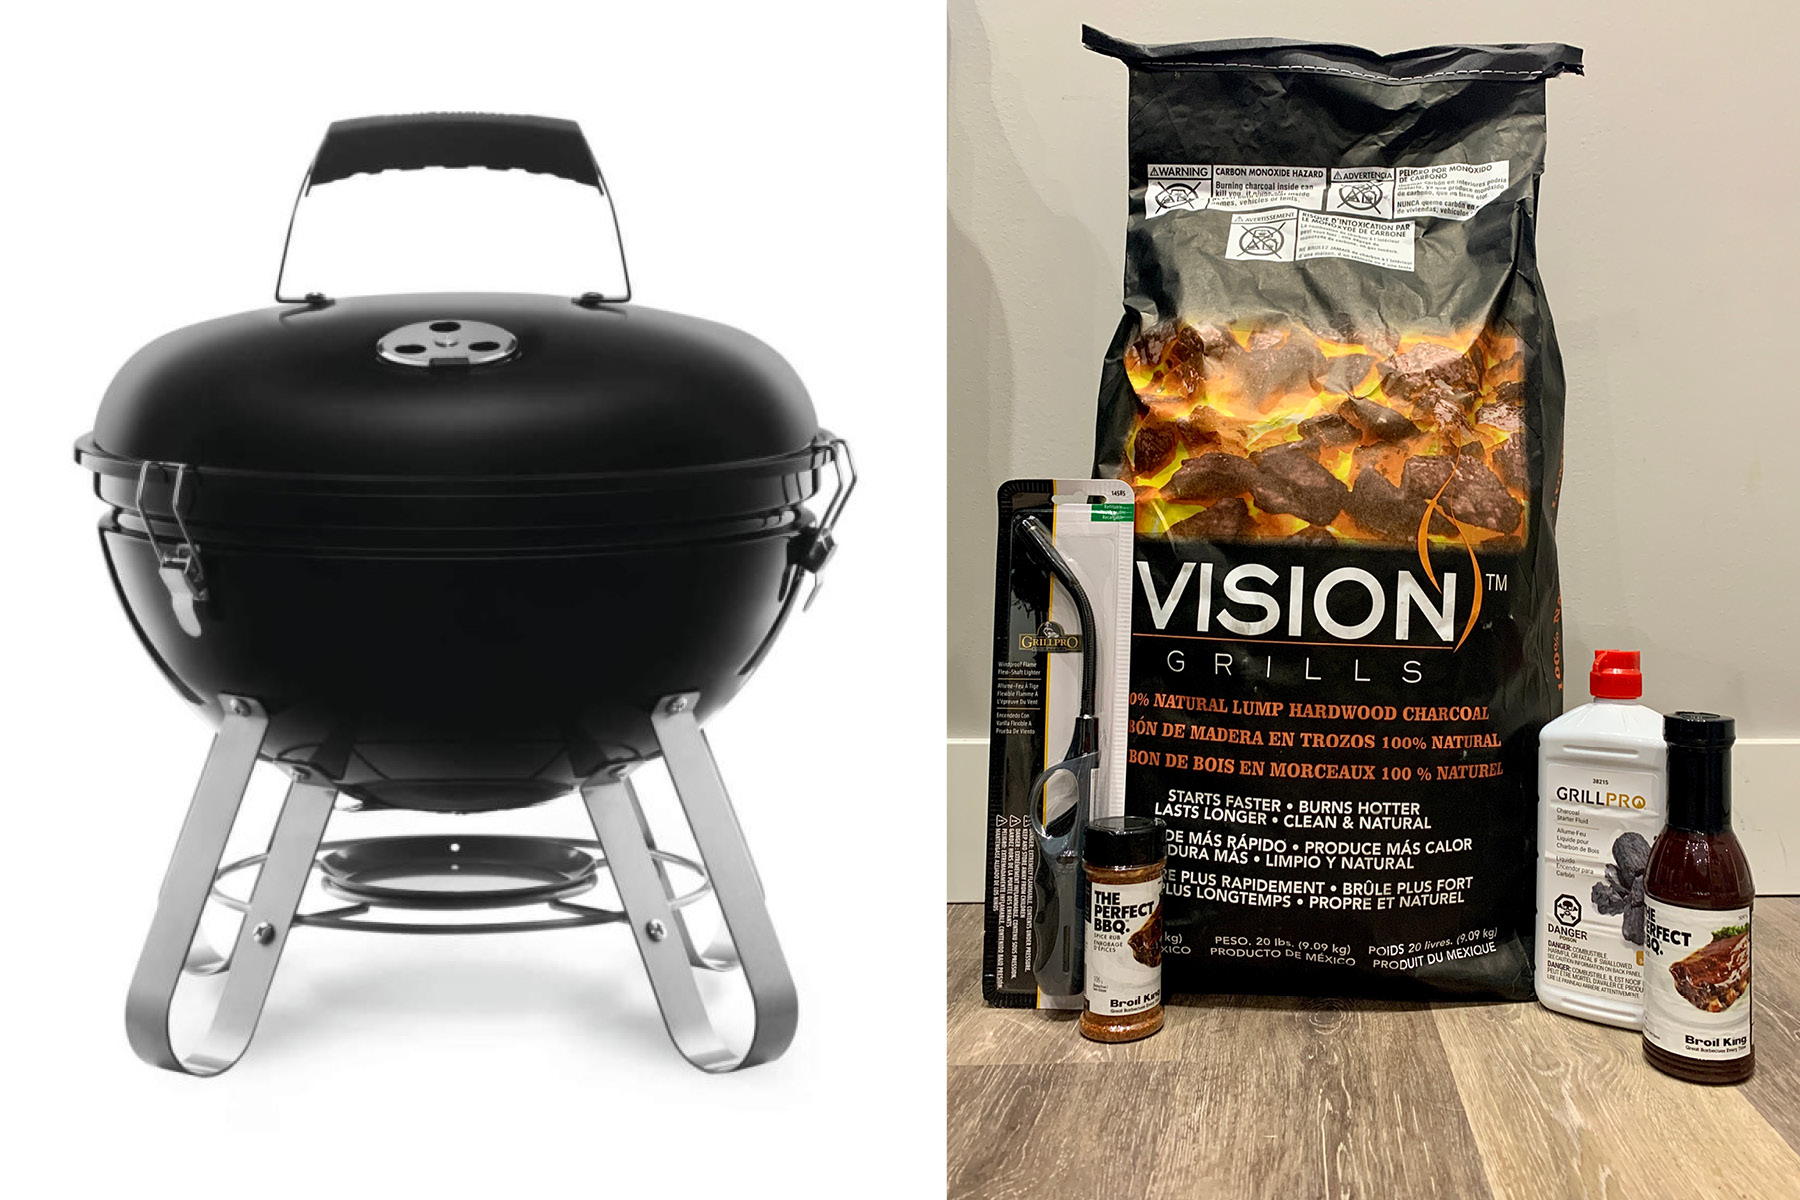 a photo of a small briquette portable bbq in black color on the right side. On the left side is a prize pack of briquettes, lighter fluid, bbq spices and a bbq lighter.